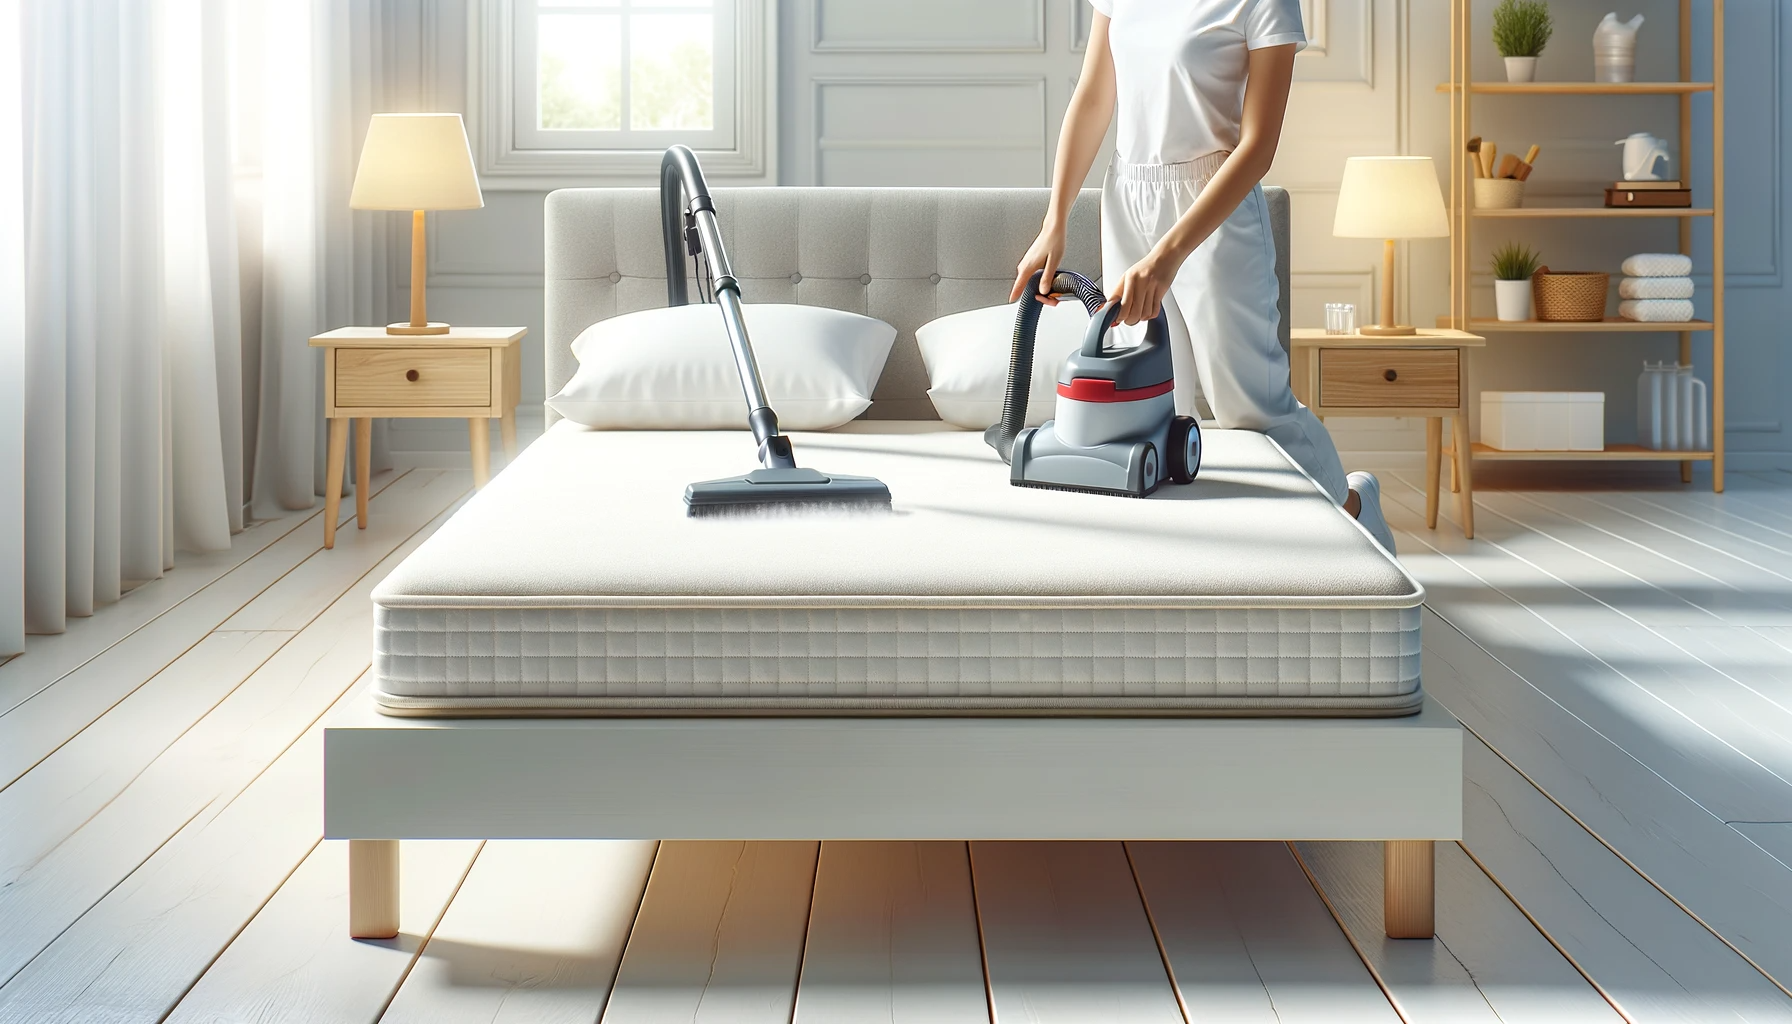 Can I use a carpet cleaner on my mattress?